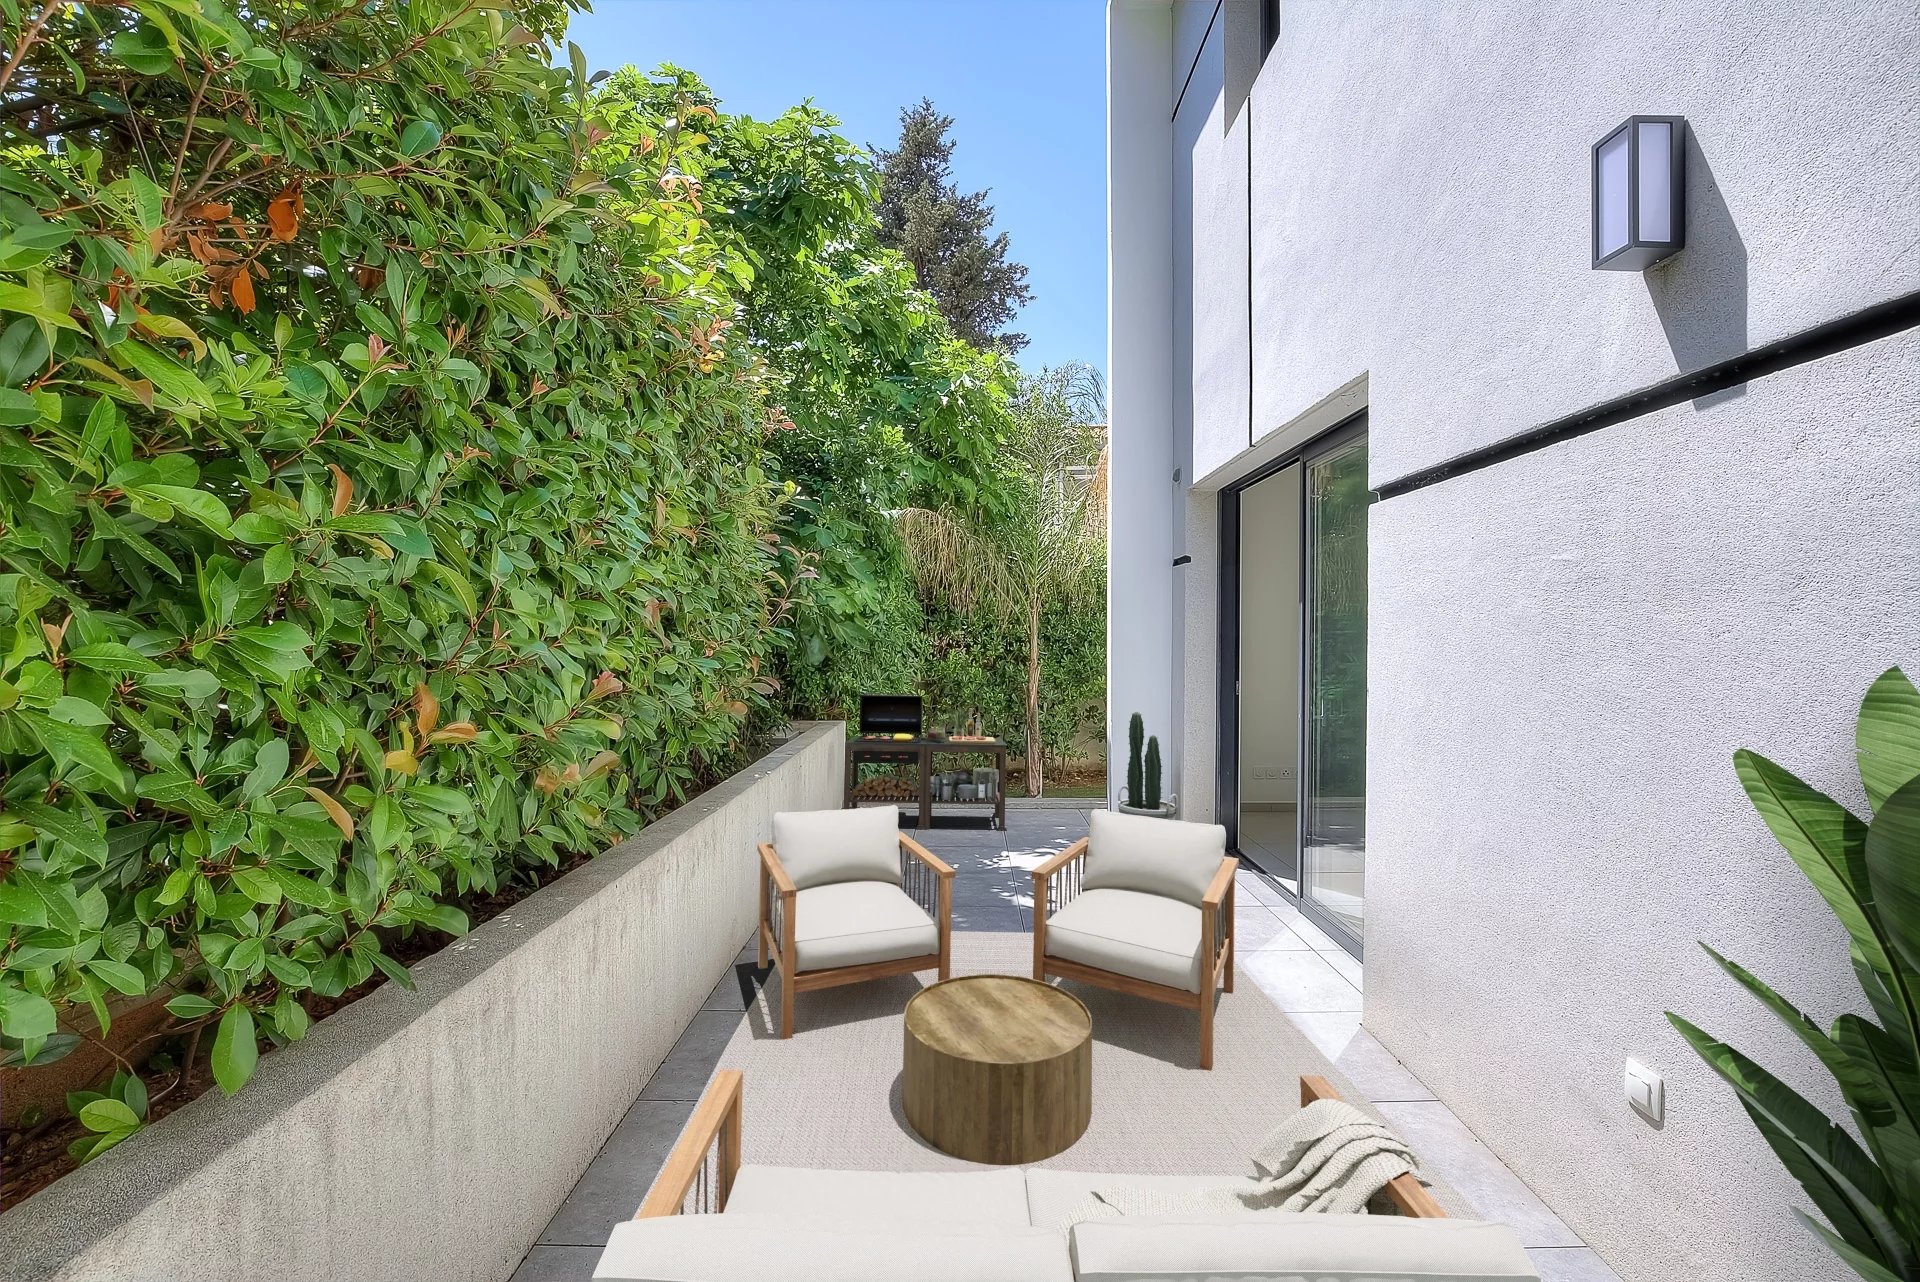 Garden apartment for sale in Cannes - Montfleury area